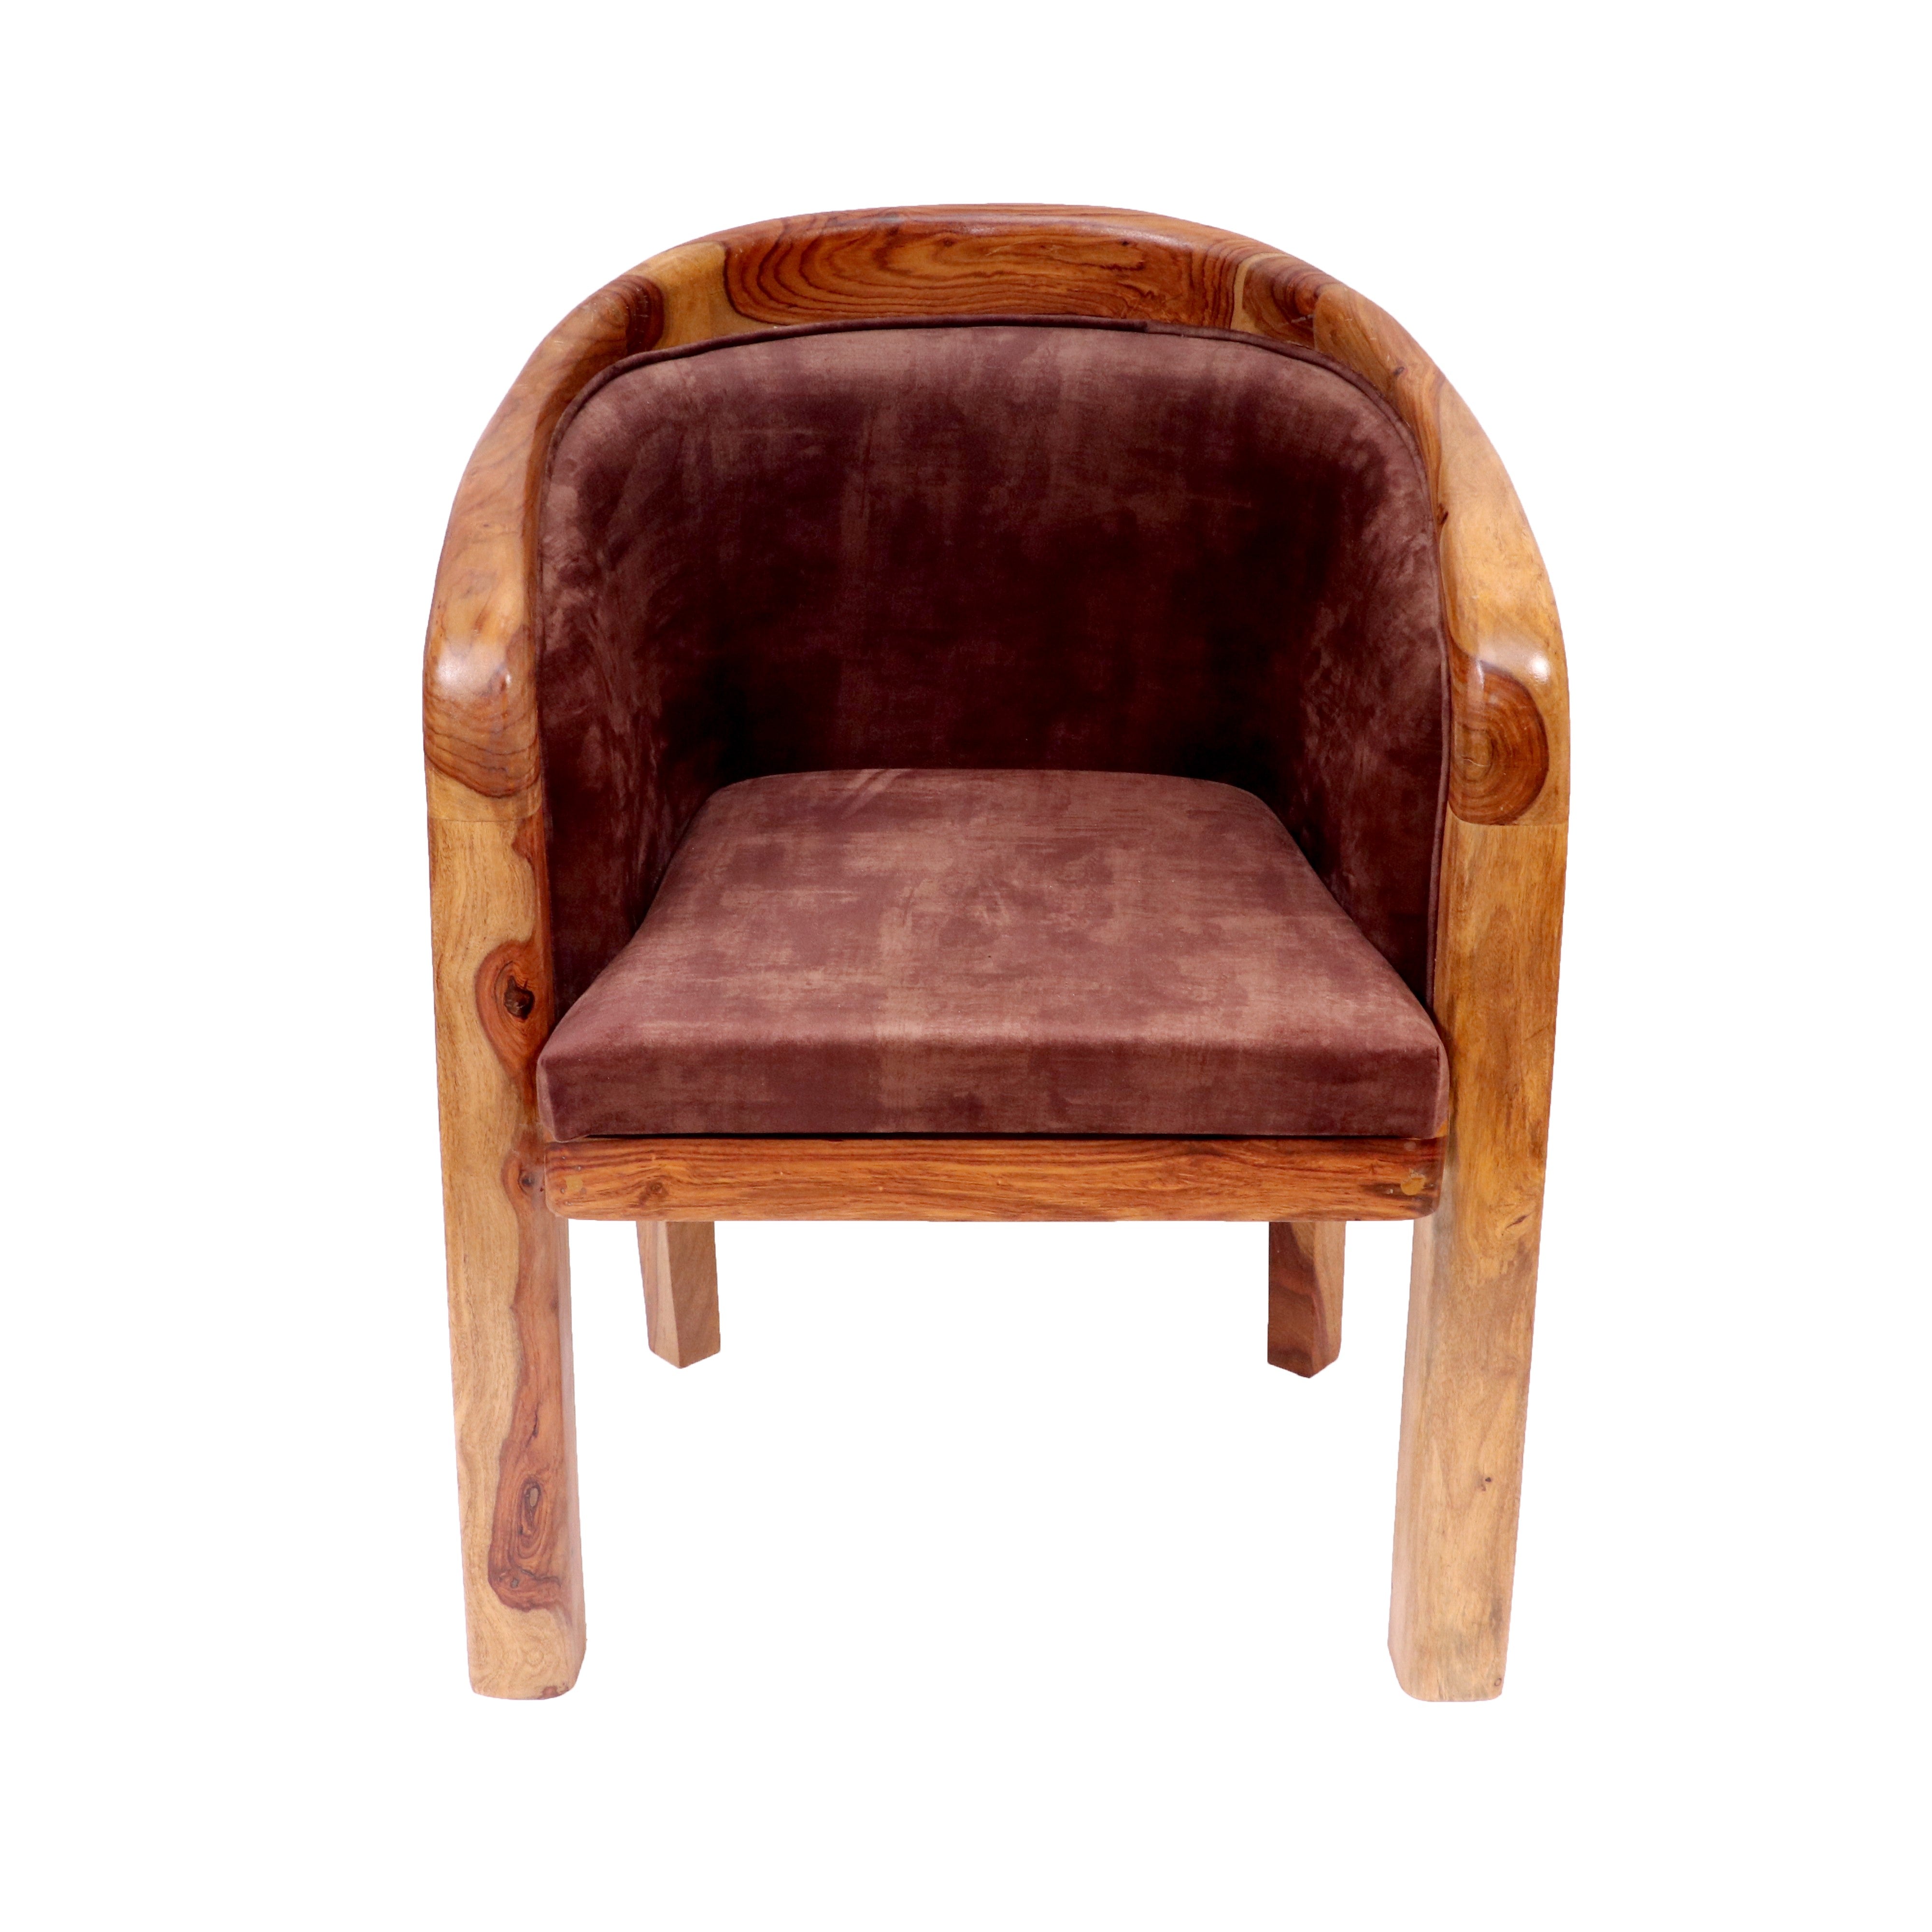 Sheesham wood Comfy upholstered Chair Arm Chair